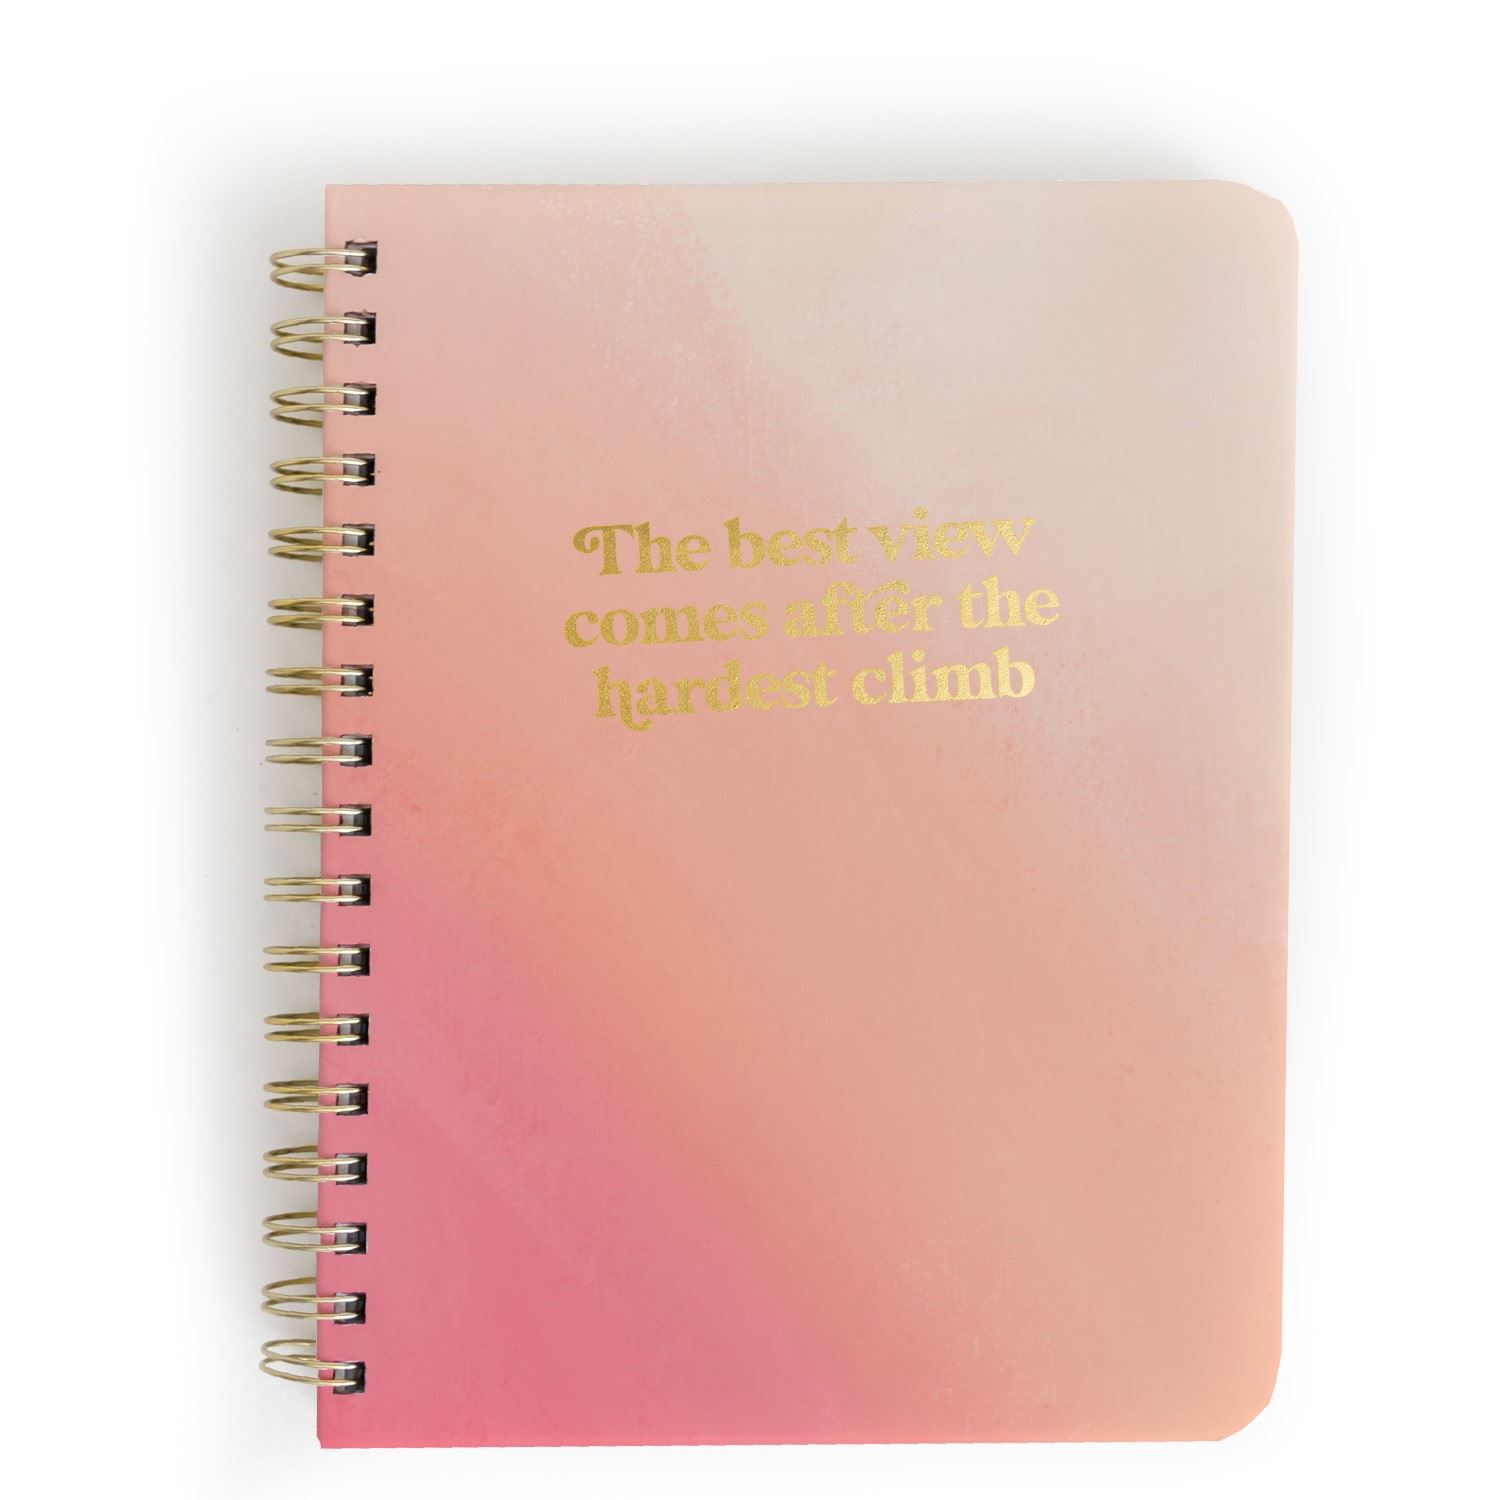 THE BEST VIEW COMES AFTER THE HARDEST CLIMB Journal ??Jot your thoughts, take a note, sketch something inspiring, the possibilities are endless! Spiral bound with gold hardware. Hardbound cover, 190 pages of lined paper, 7" x 9"